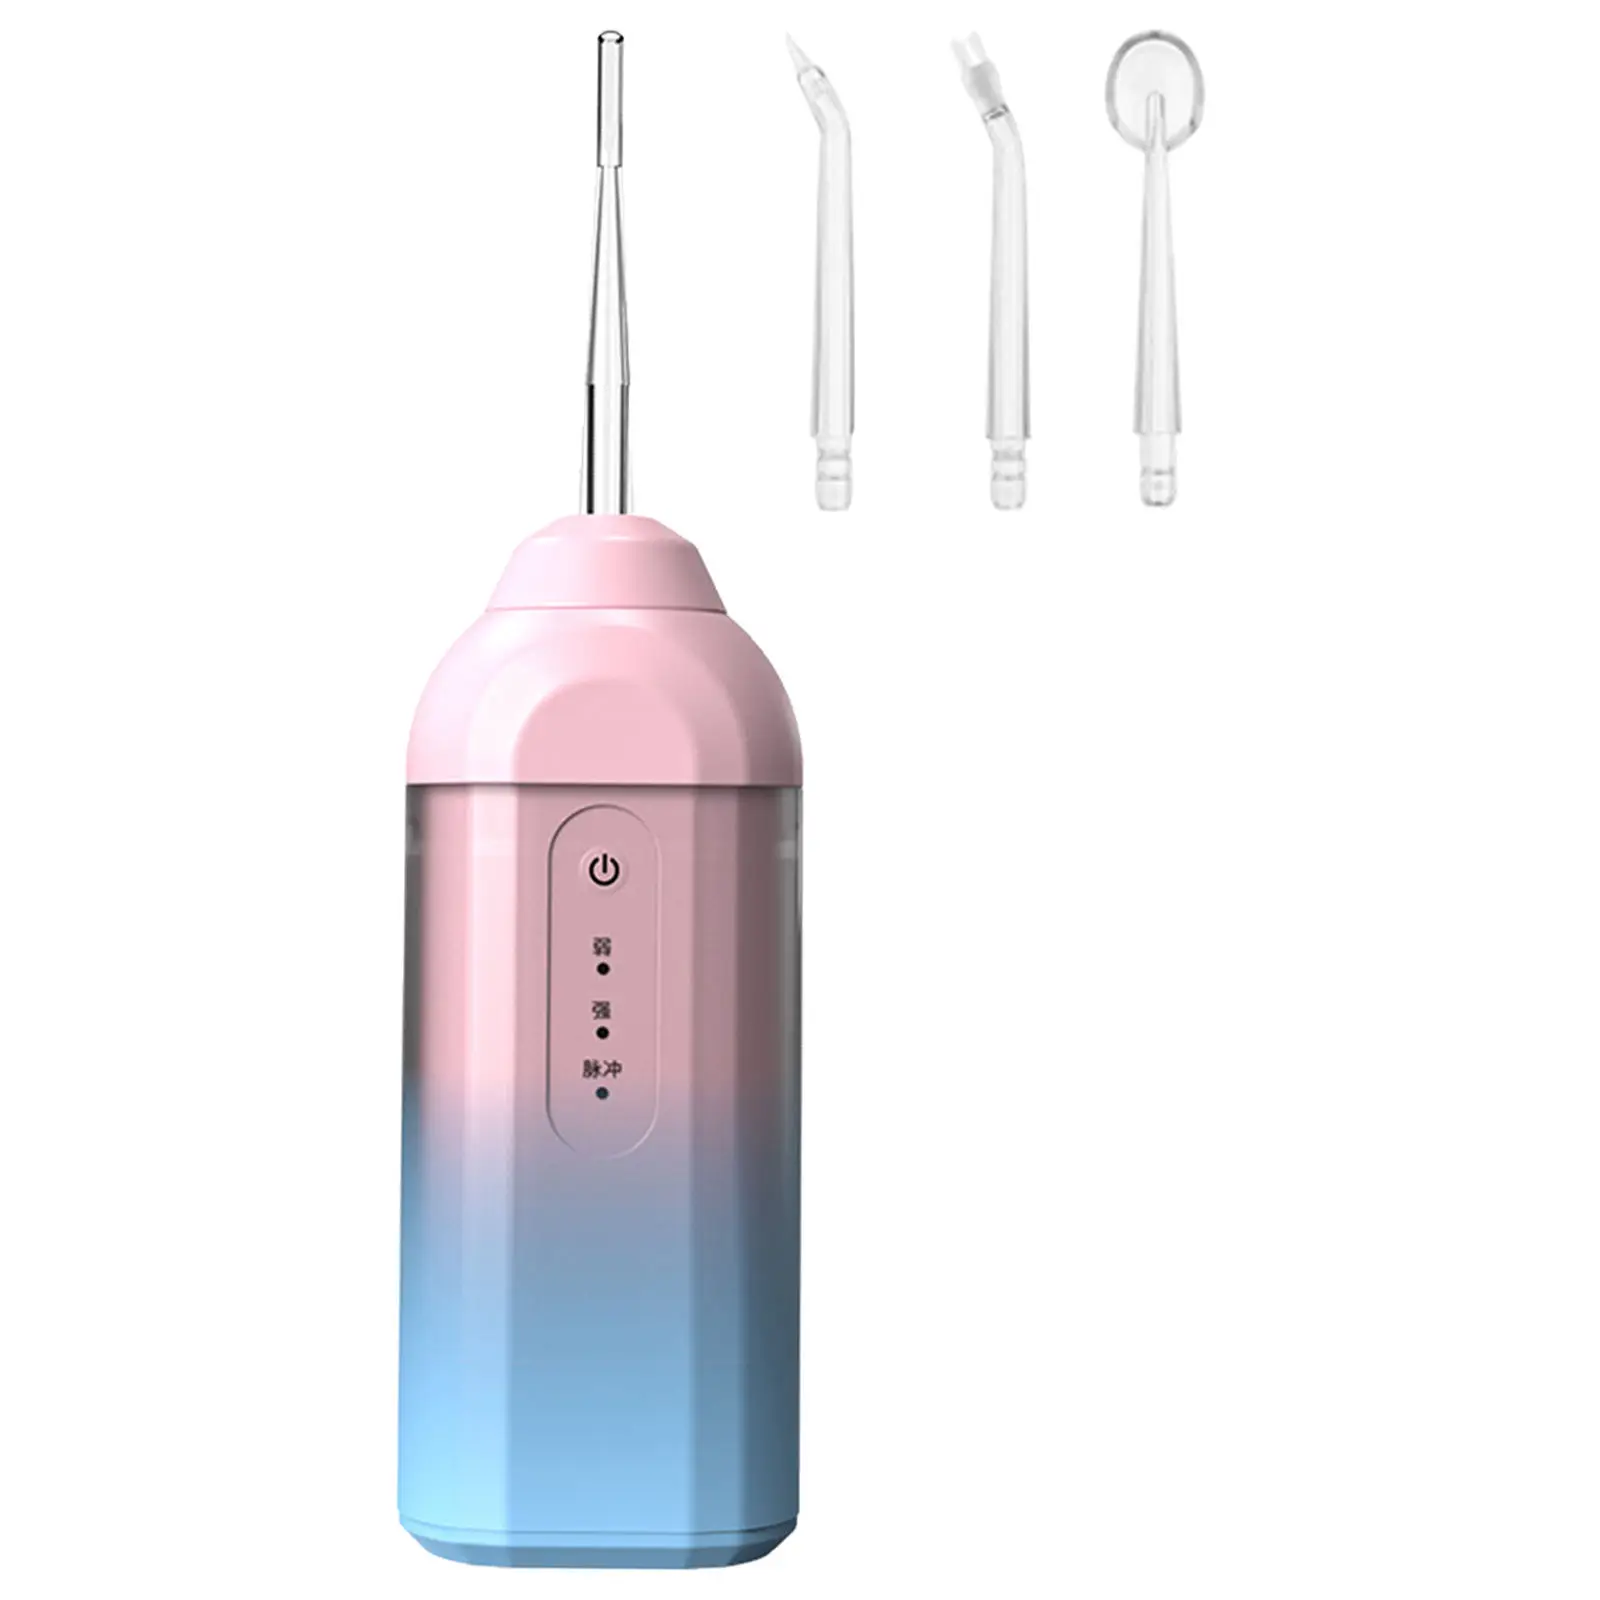 Portable Oral Irrigator Remove Food Residue 200ml Cordless Electric Teeth Cleaner Wash Worry Free Deep cleansing